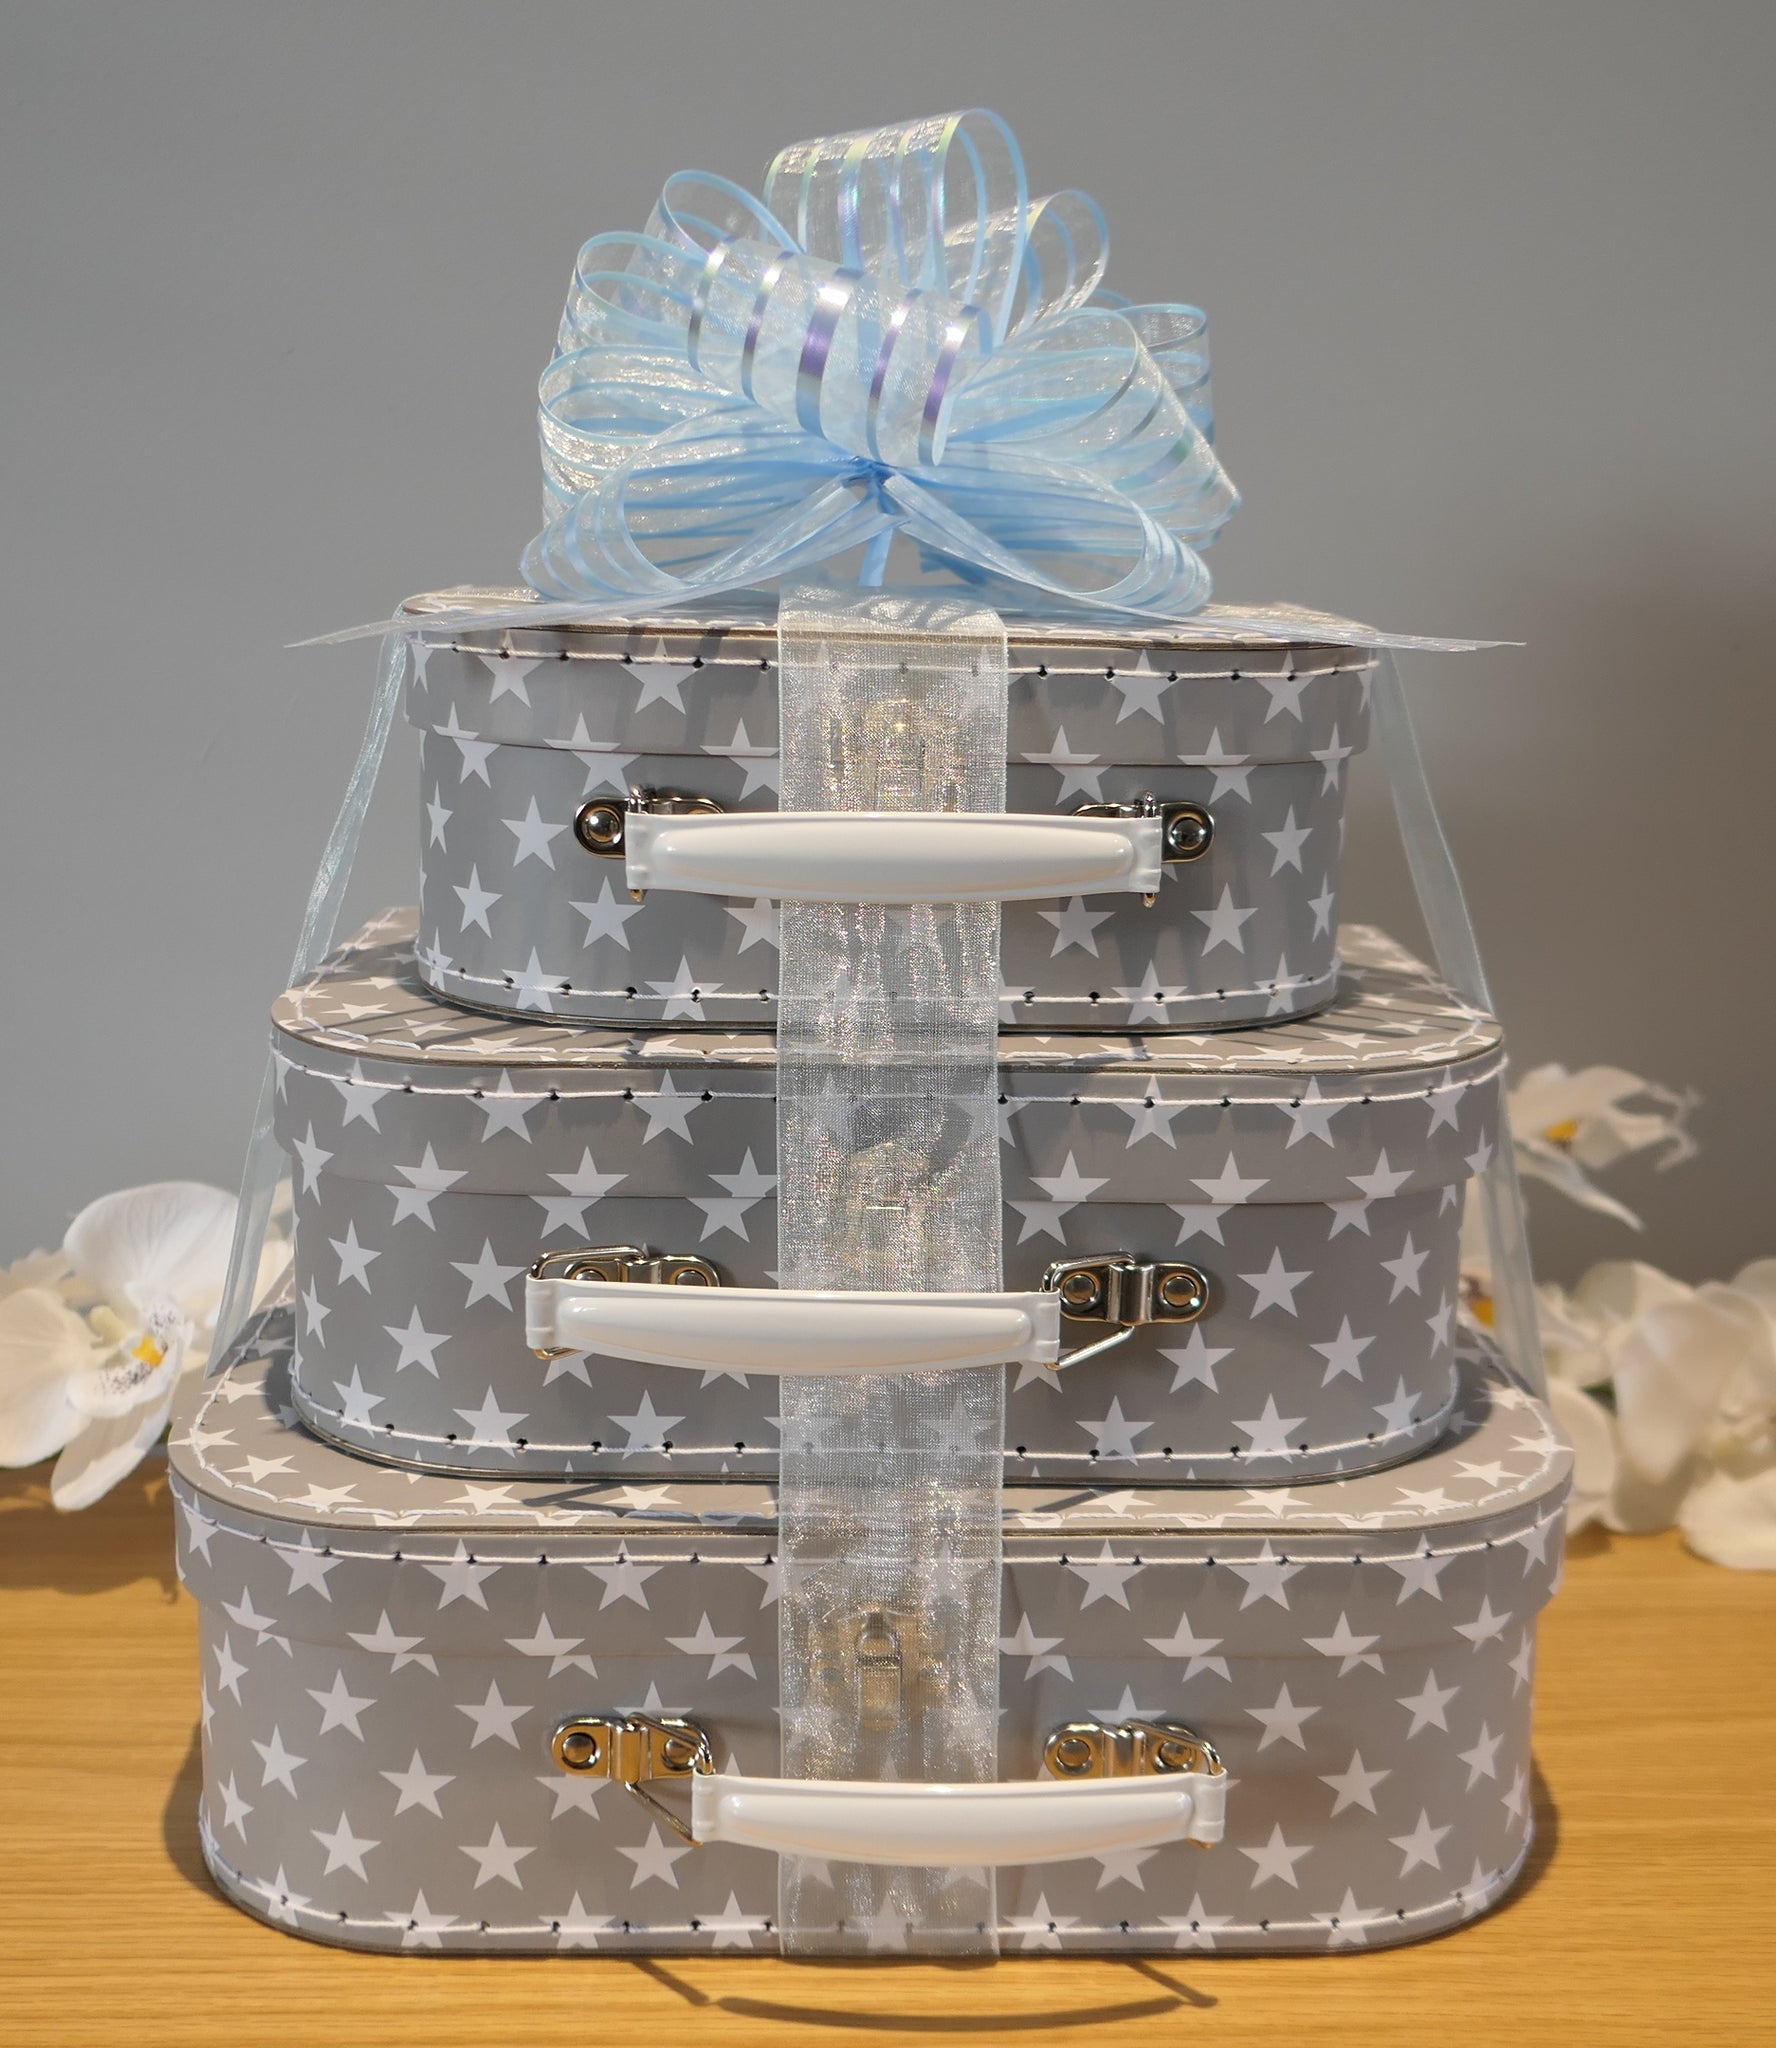 Gifts for Baby - Gifts Luxury Collection